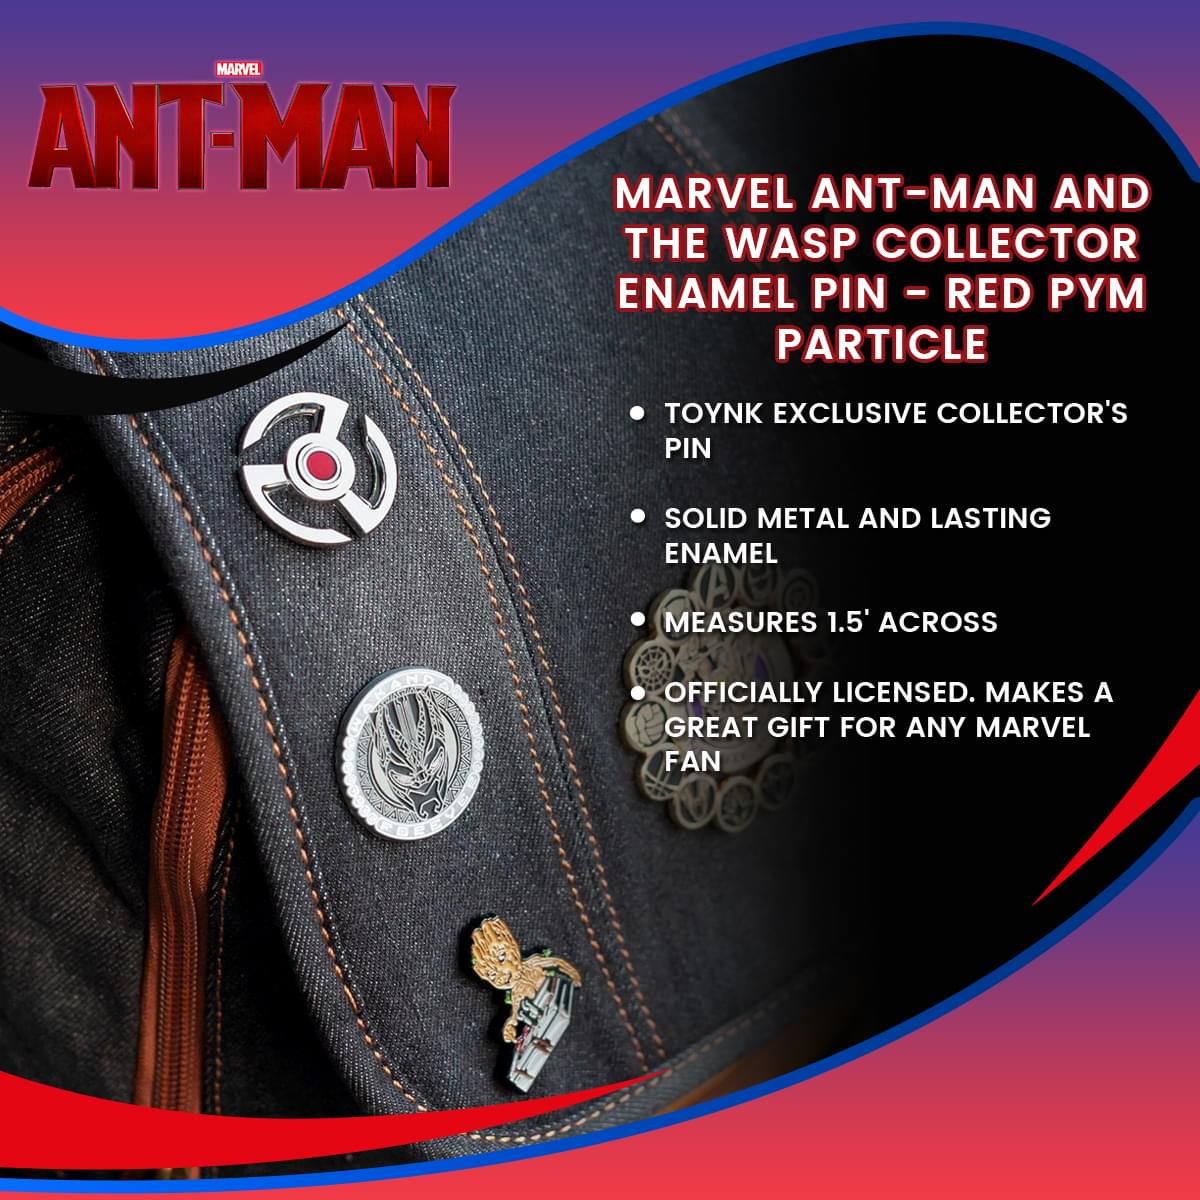 Marvel Ant-Man and the Wasp Collector Enamel Pin - Red Pym Particle